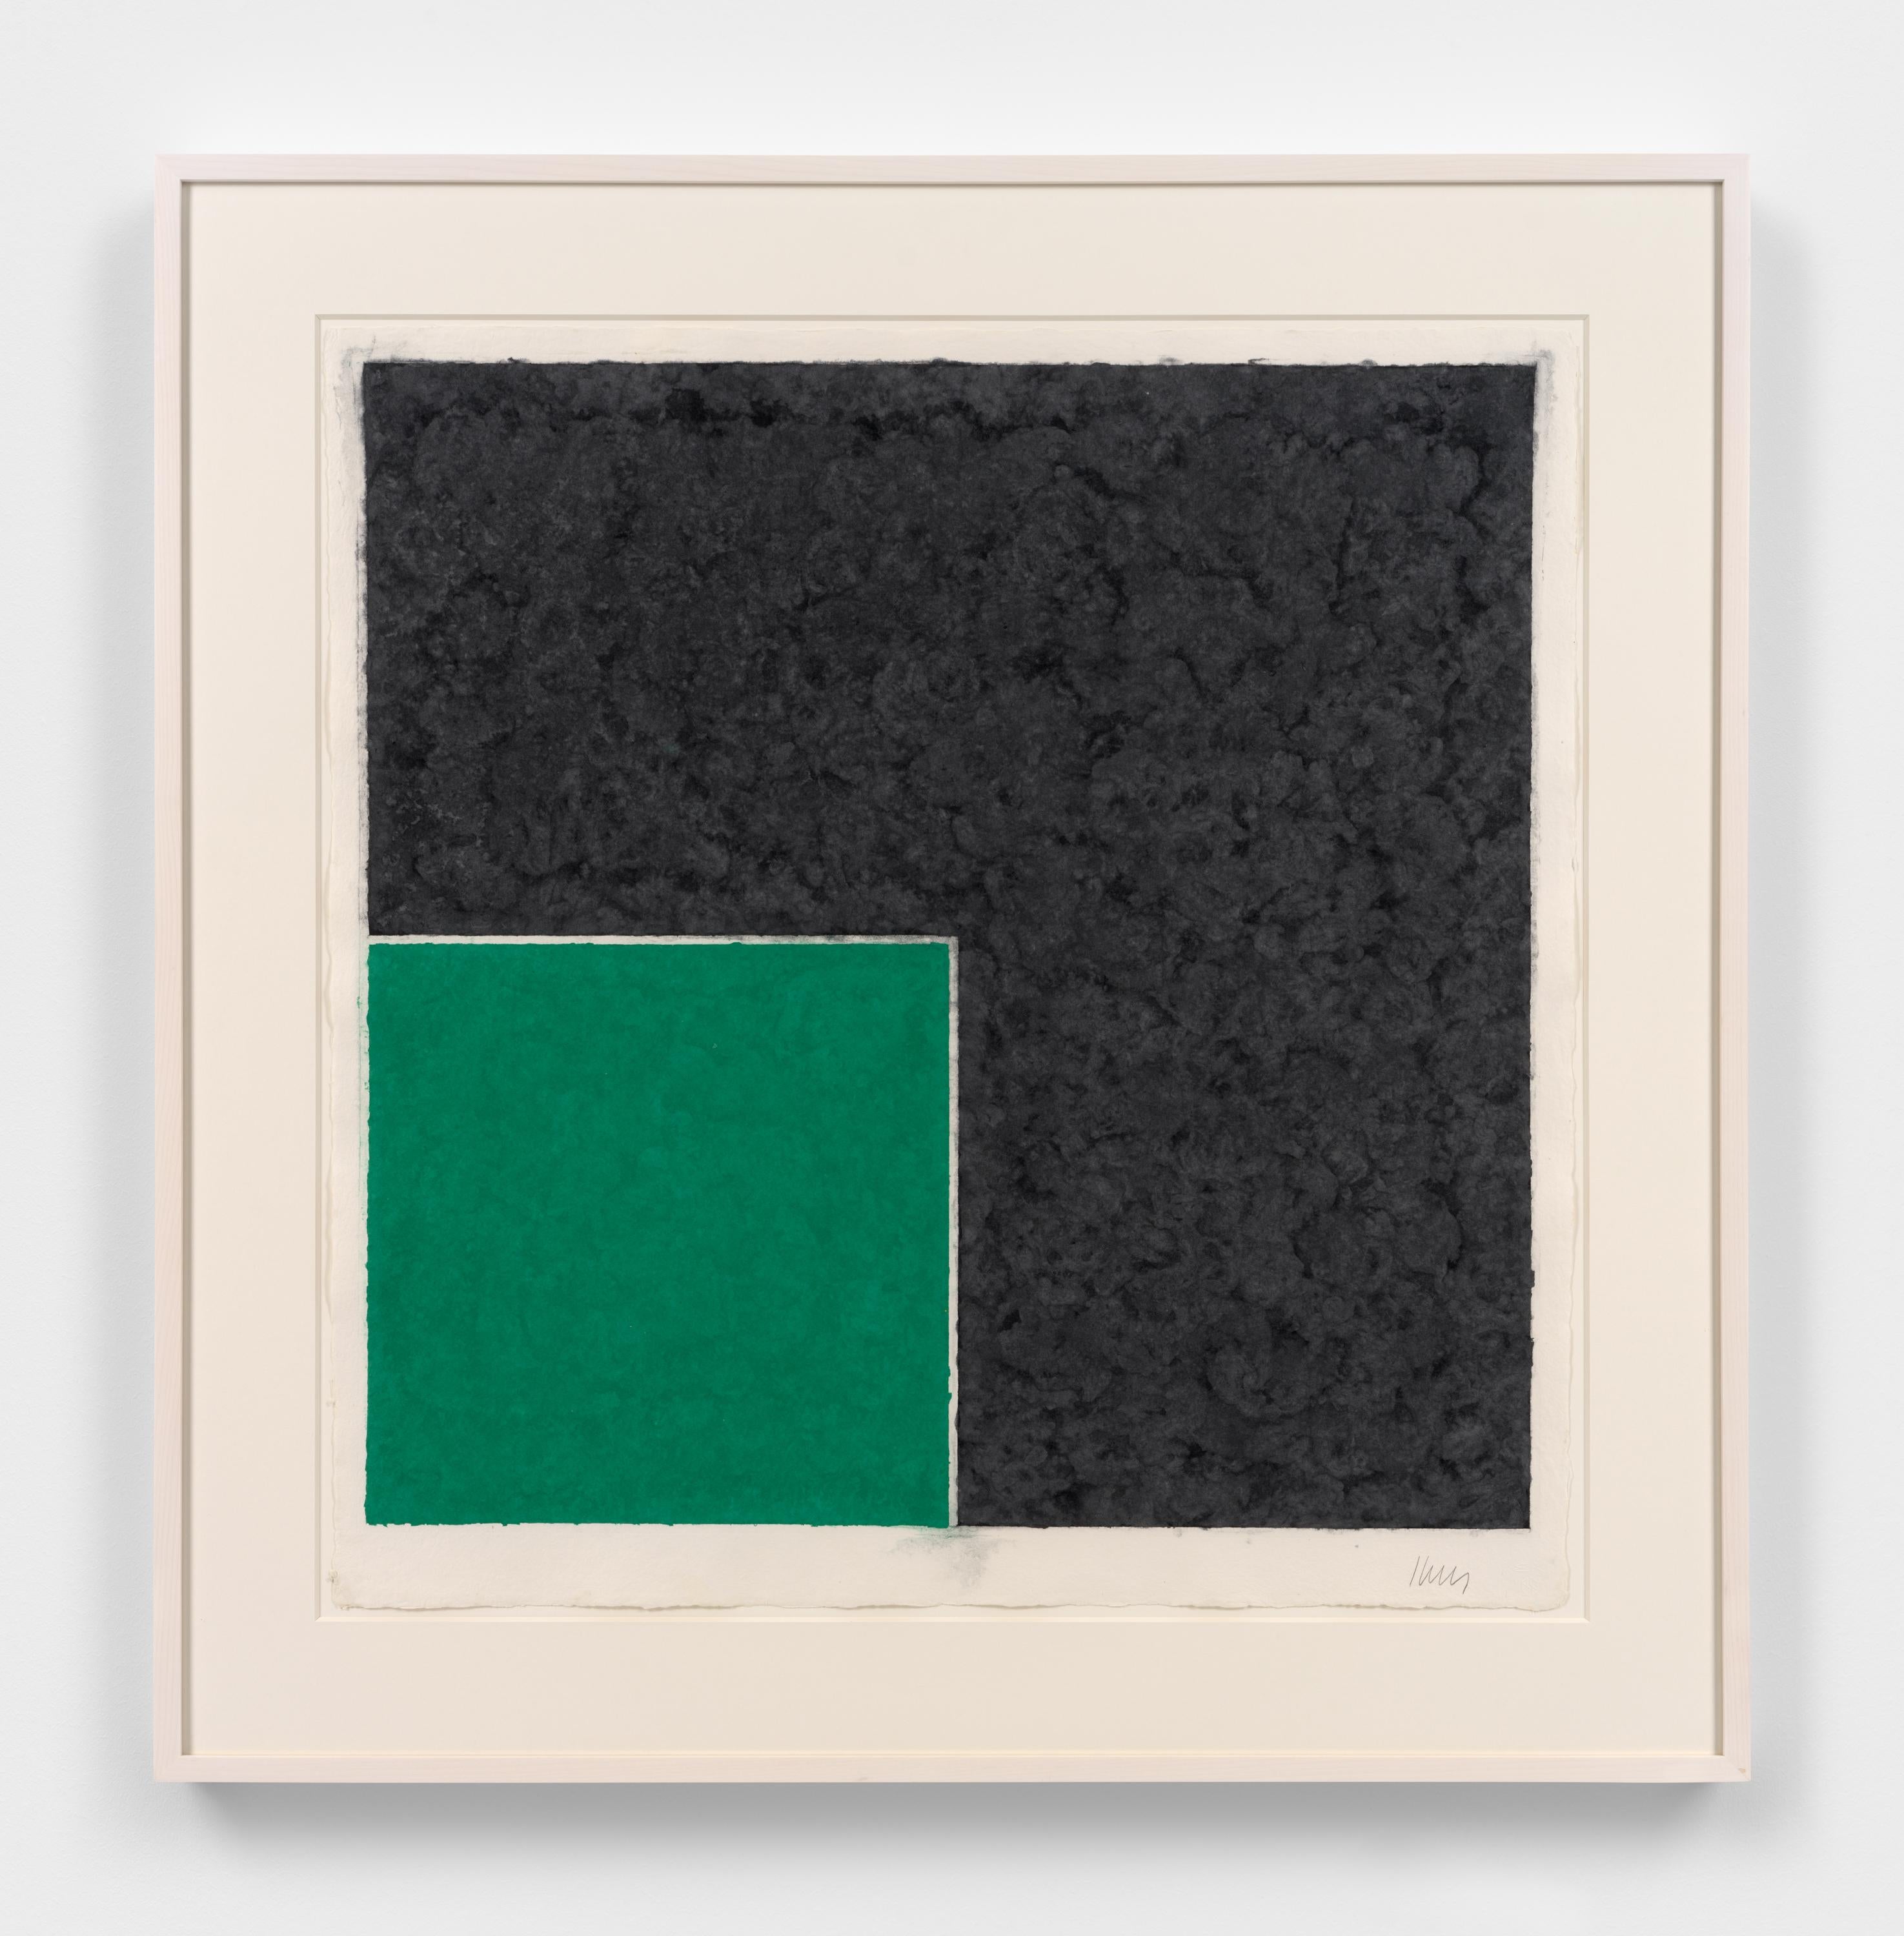 Colored Paper Image XVIII (Green Square with Dark Gray) - Print by Ellsworth Kelly